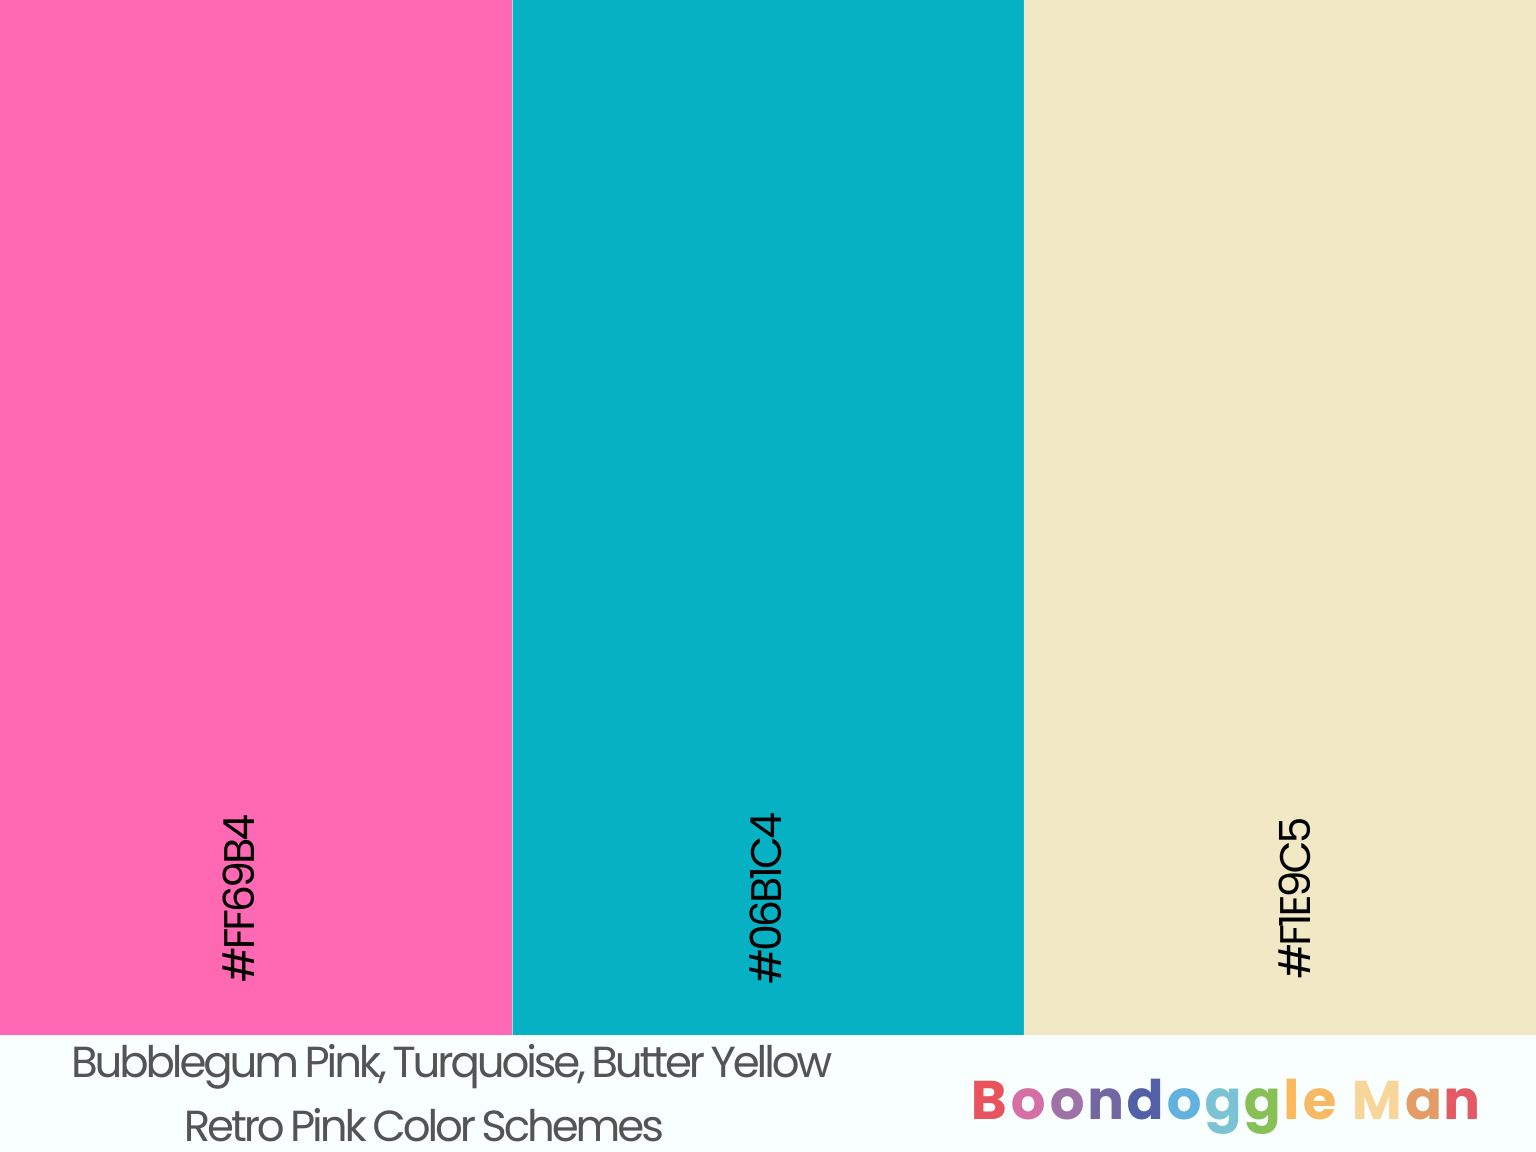 Bubblegum Pink, Turquoise, Butter Yellow